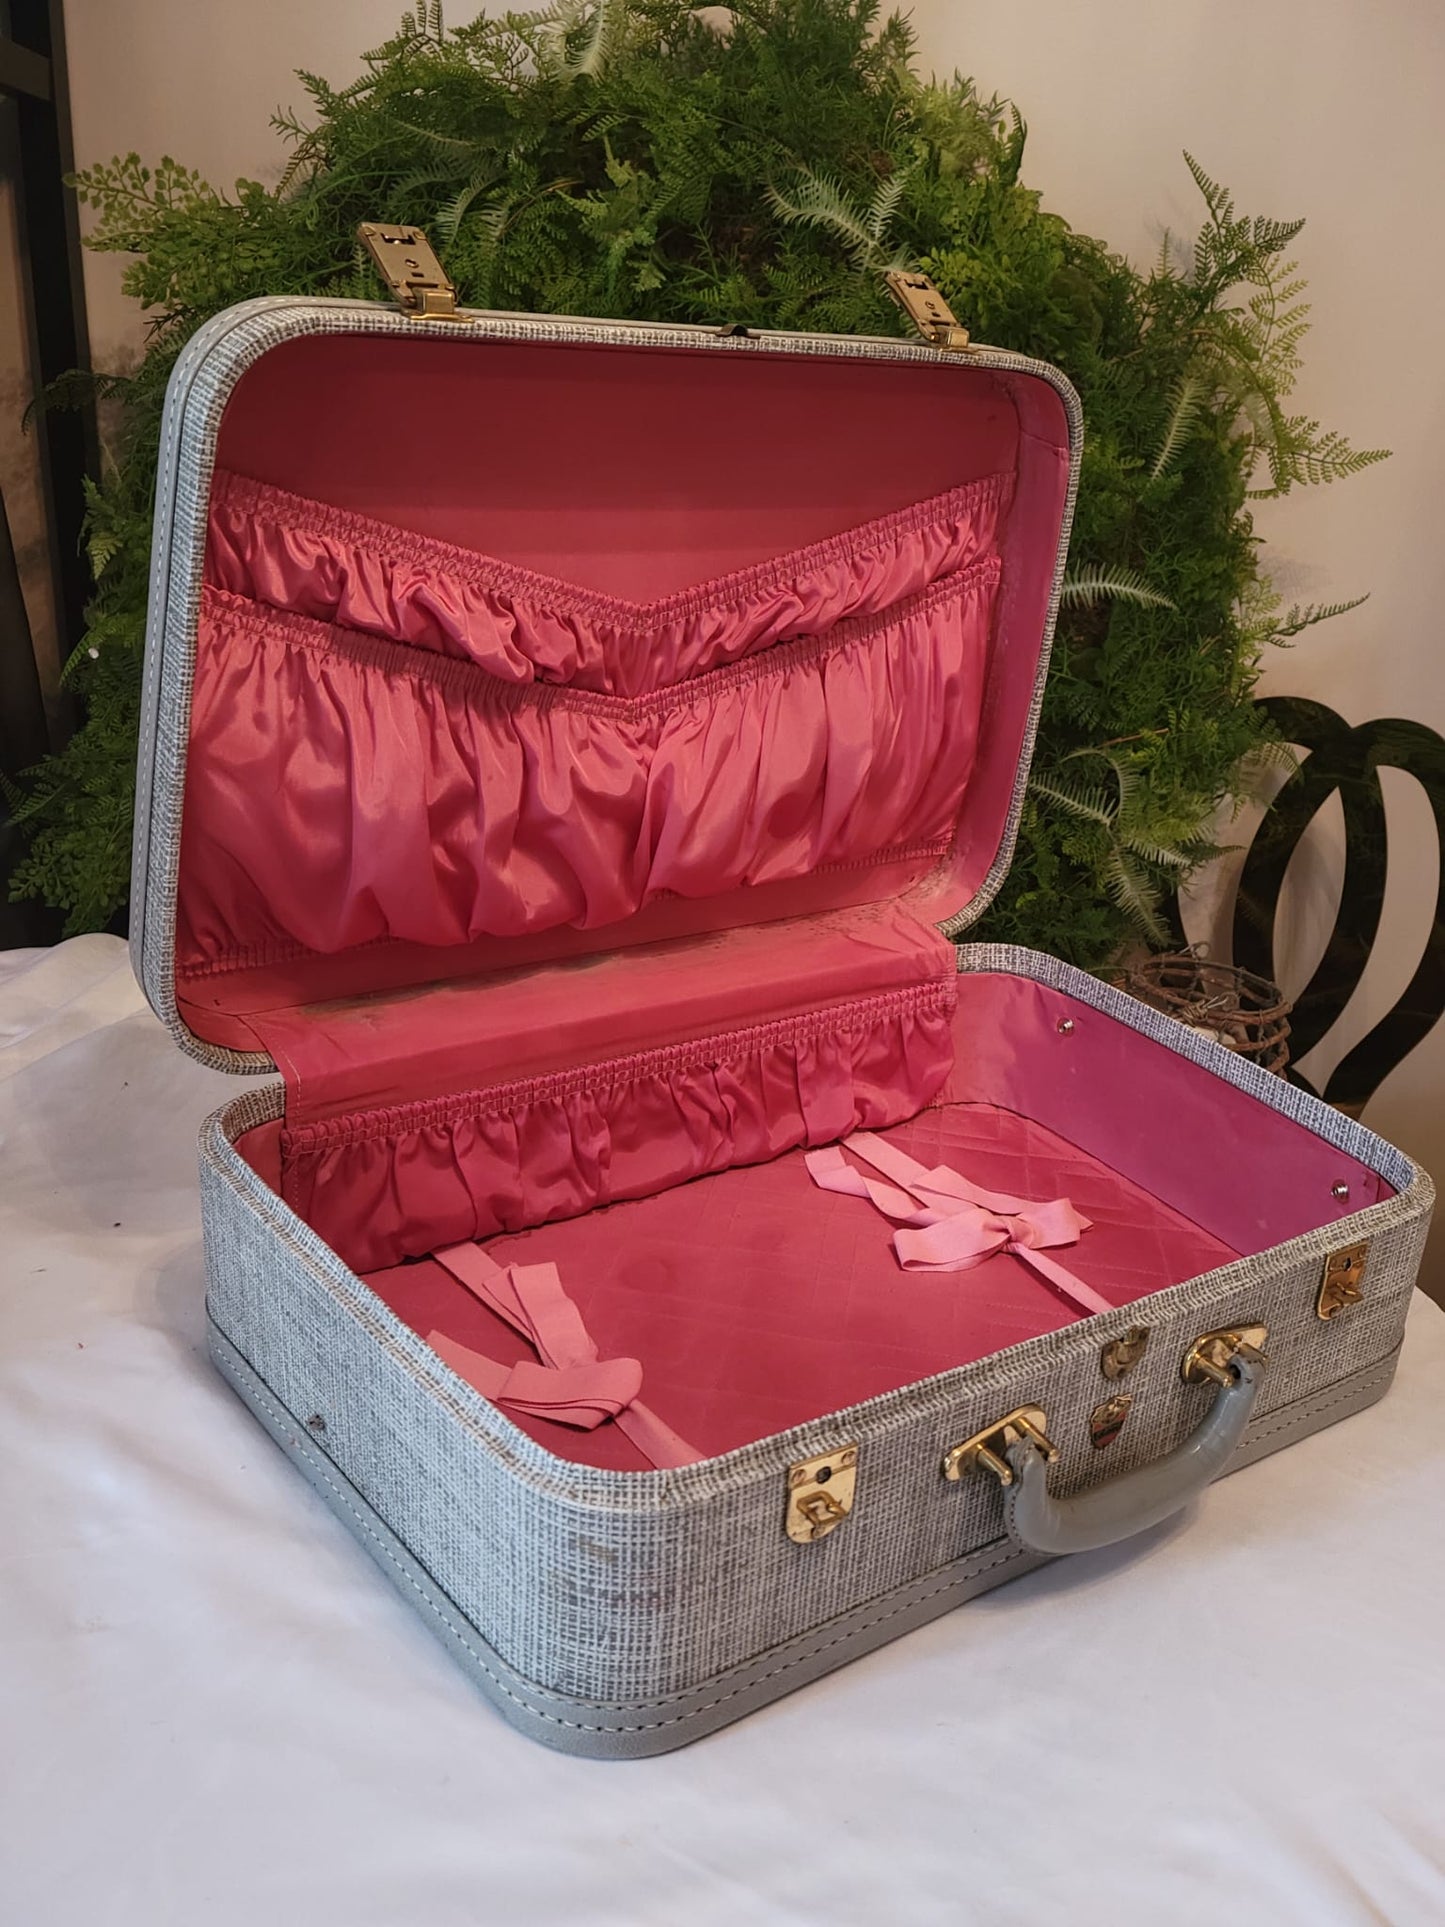 Vintage Luggage with pink interior